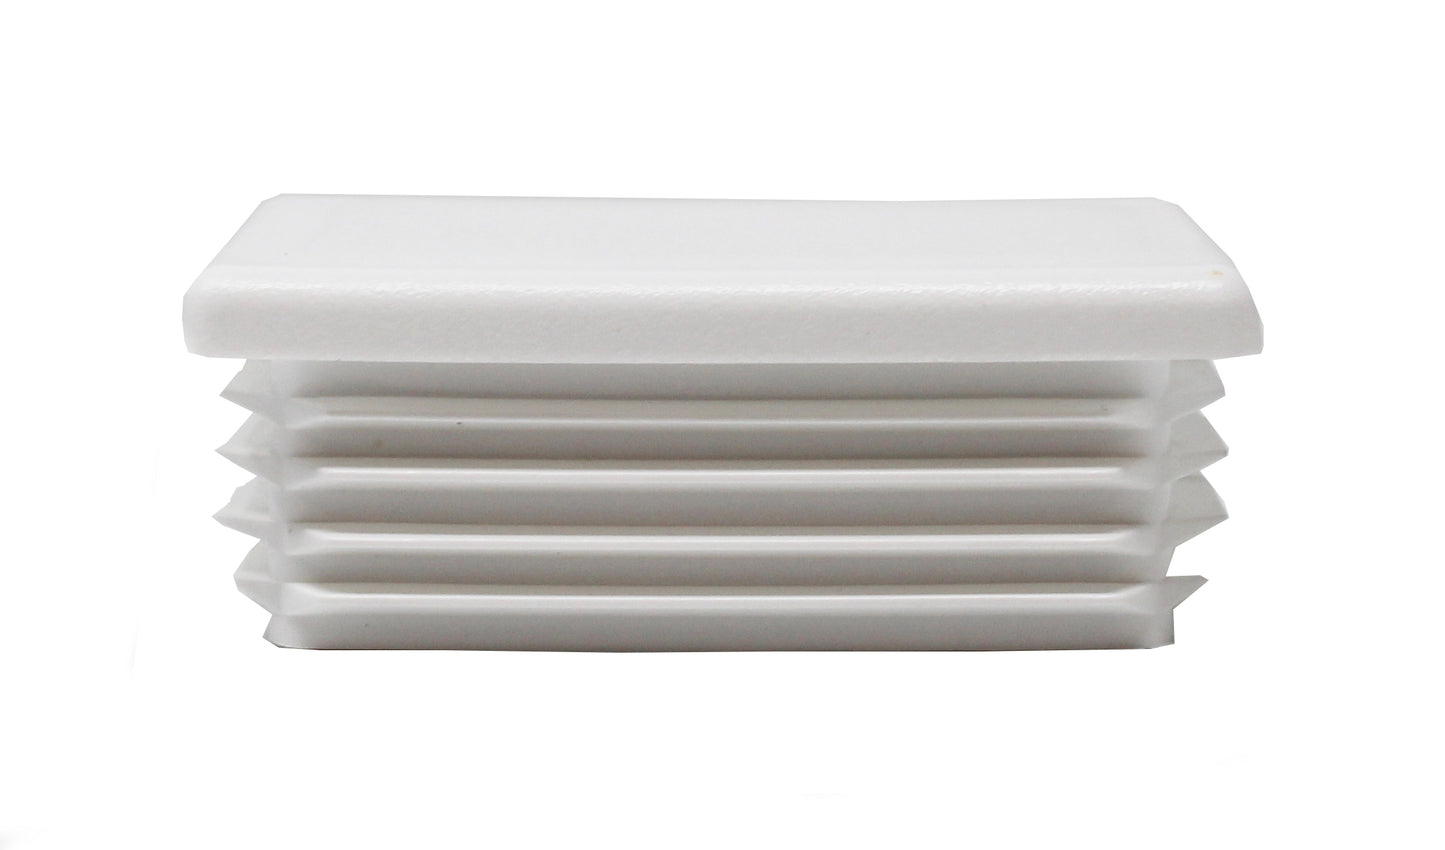 Tubing Caps 2 x 3 inch Rectangle White Plastic, Finishing Plug, Pipe Tubing End Cap, Durable Chair Glide Universal